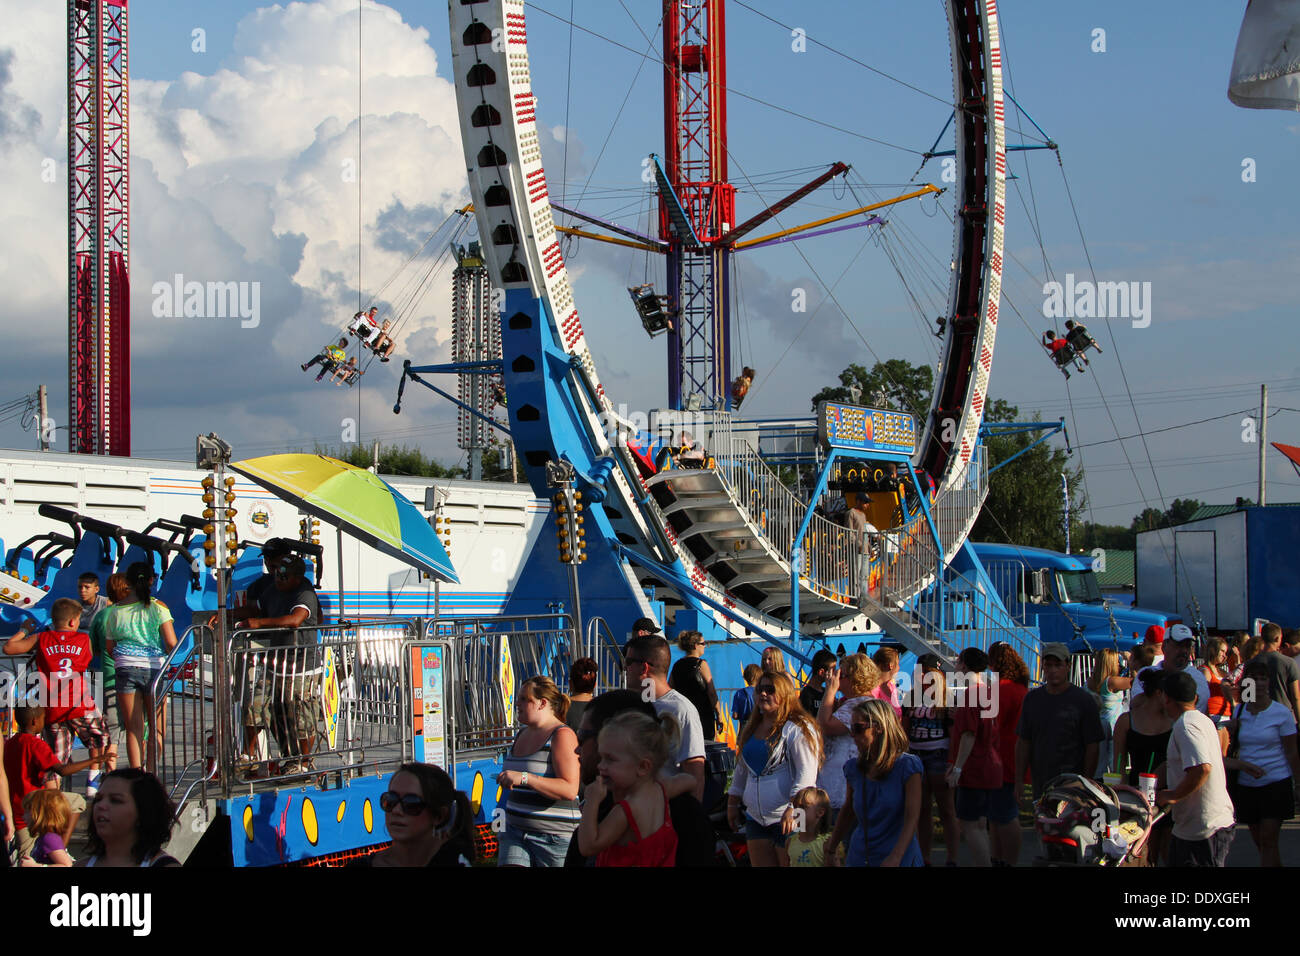 Carnival Rides and people. Canfield Fair. Mahoning County Fair